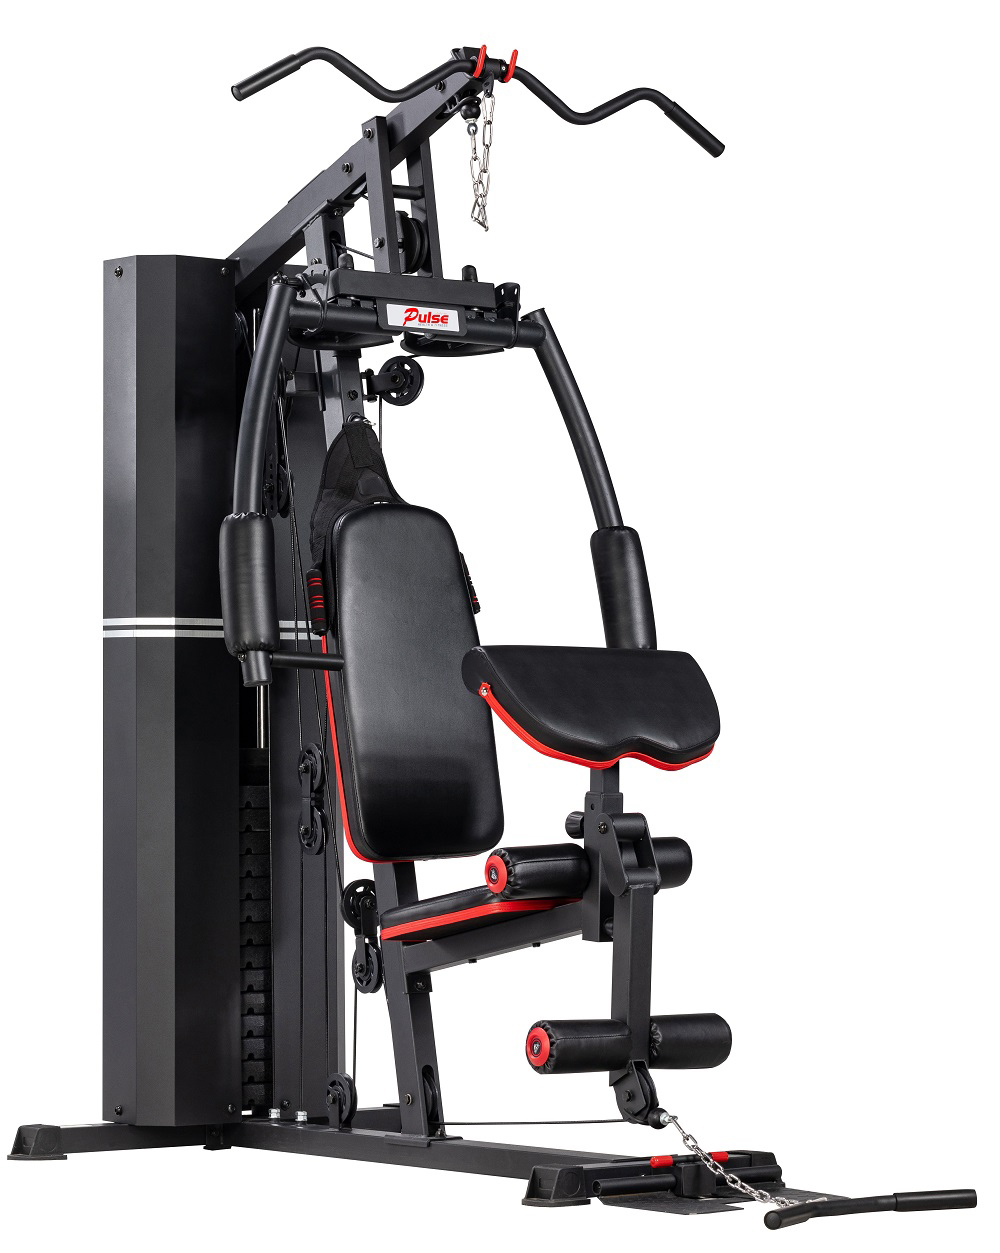 MS600S home gym product video